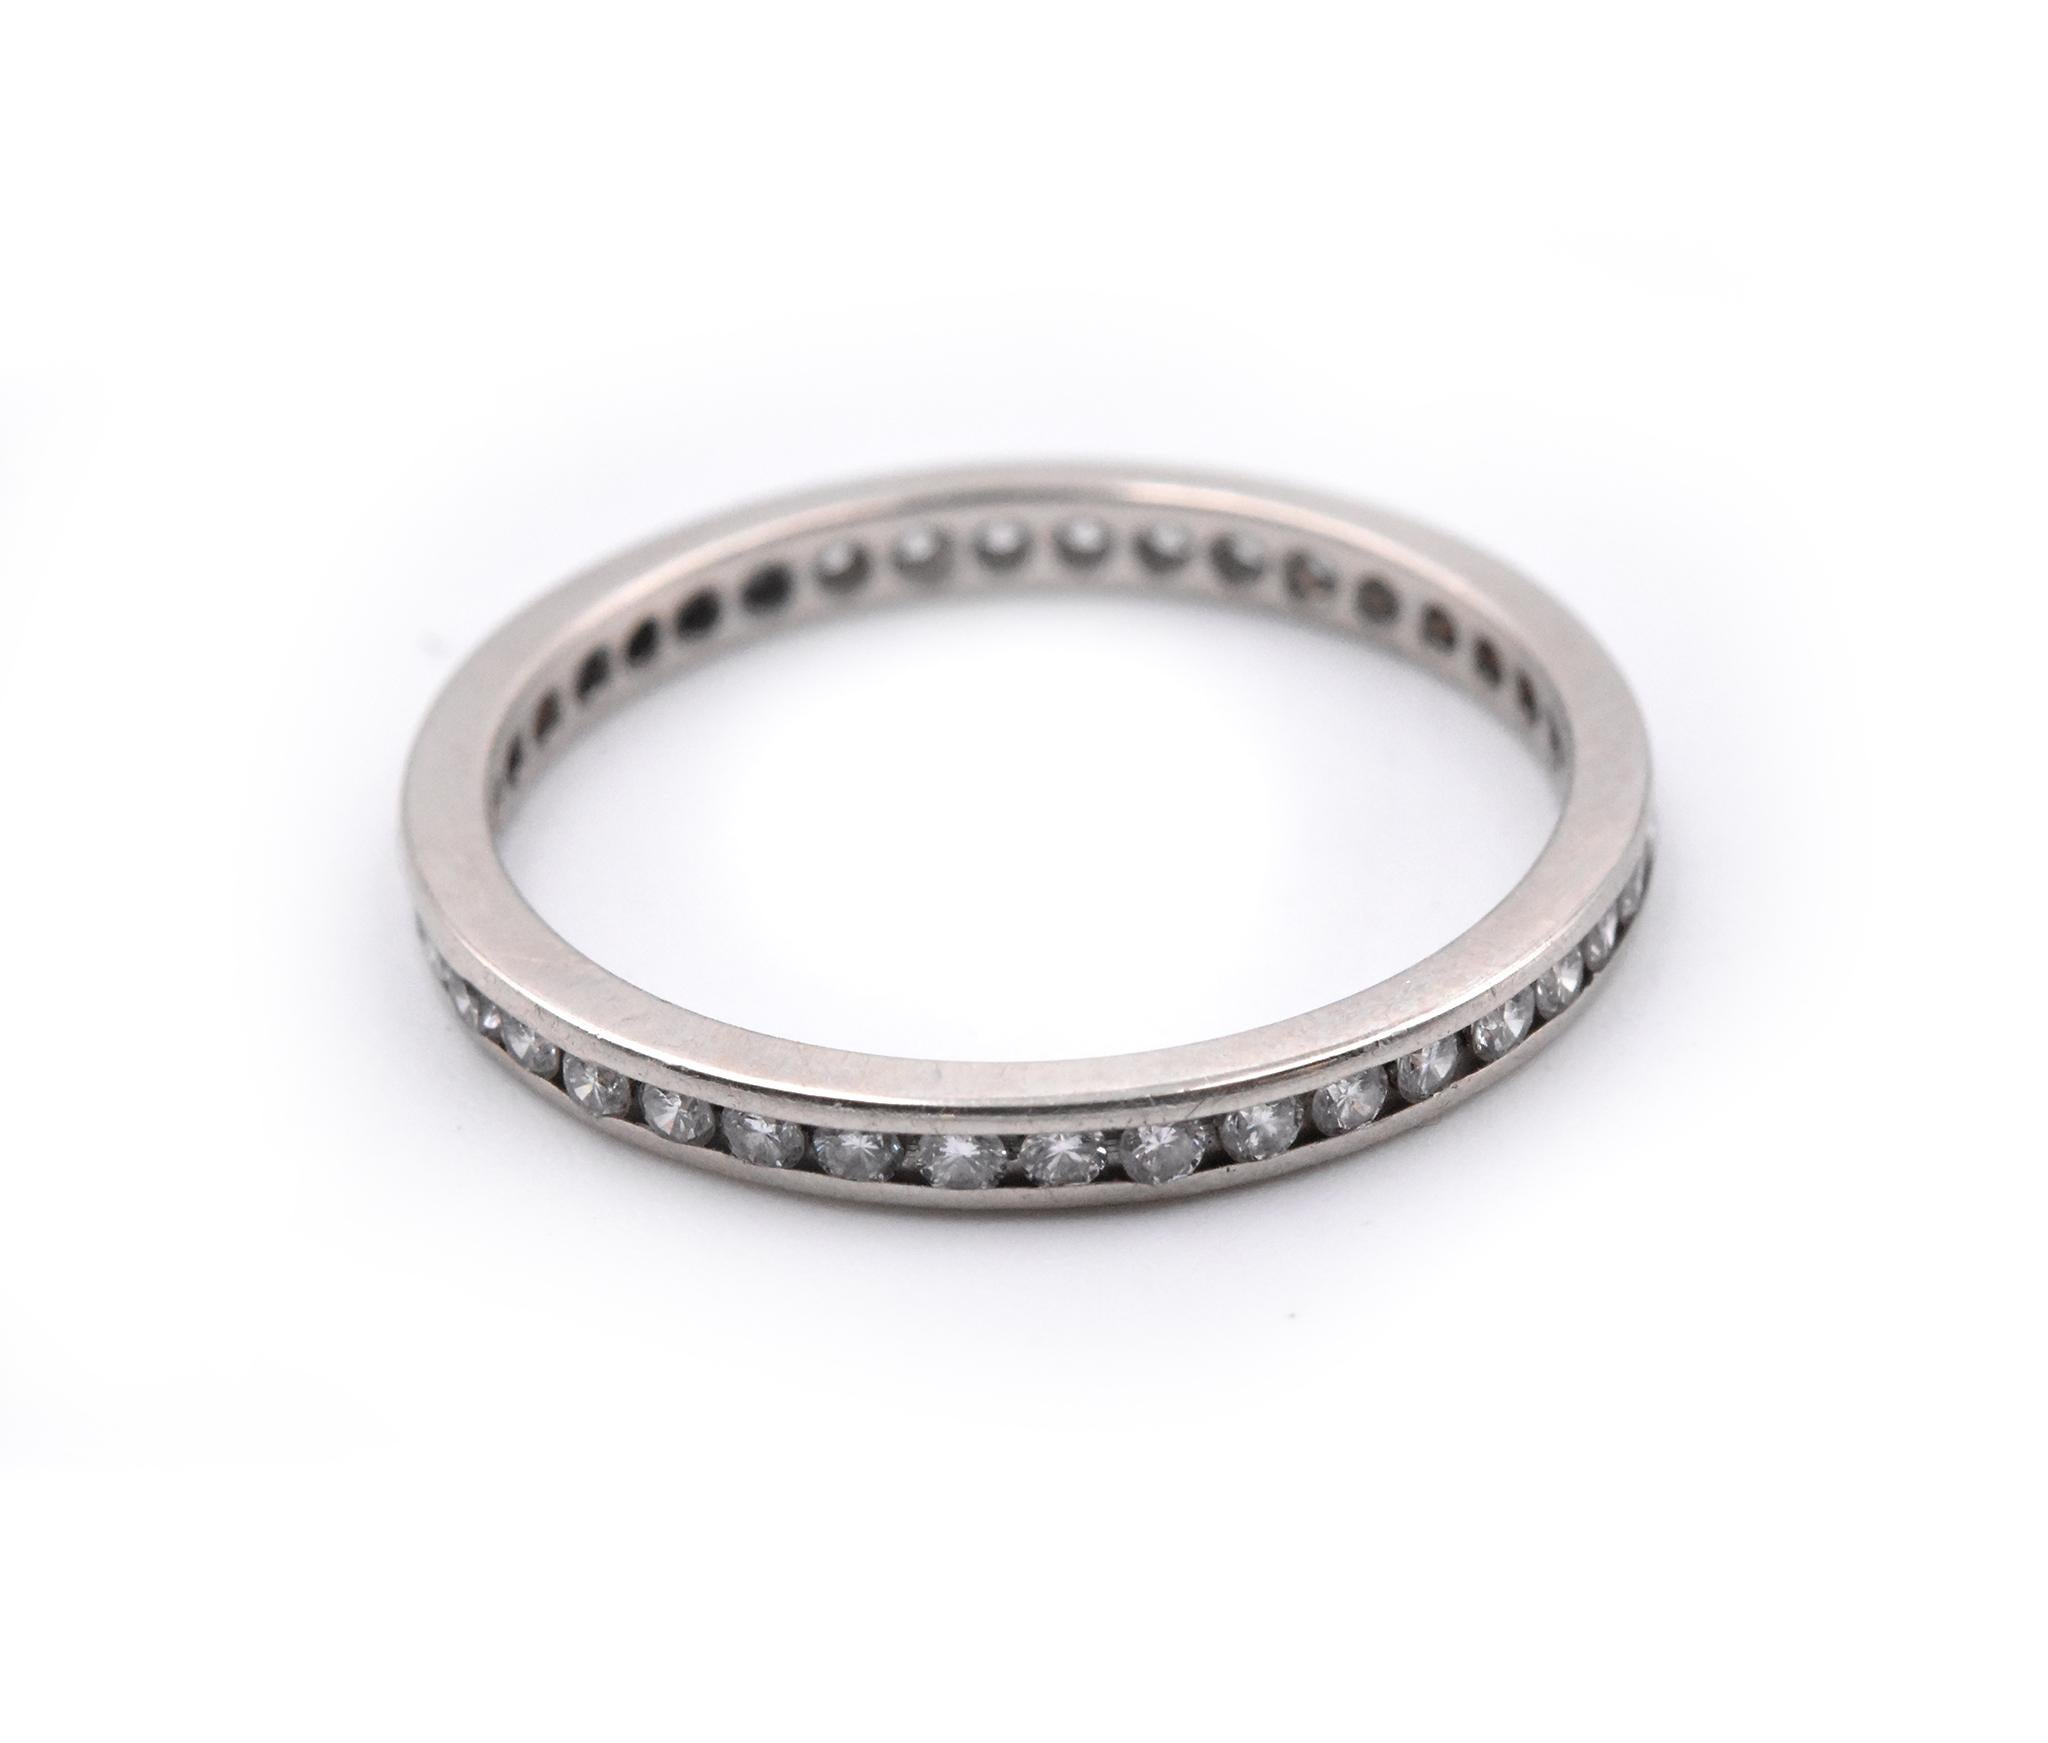 14 Karat White Gold Diamond Eternity Band In Excellent Condition For Sale In Scottsdale, AZ